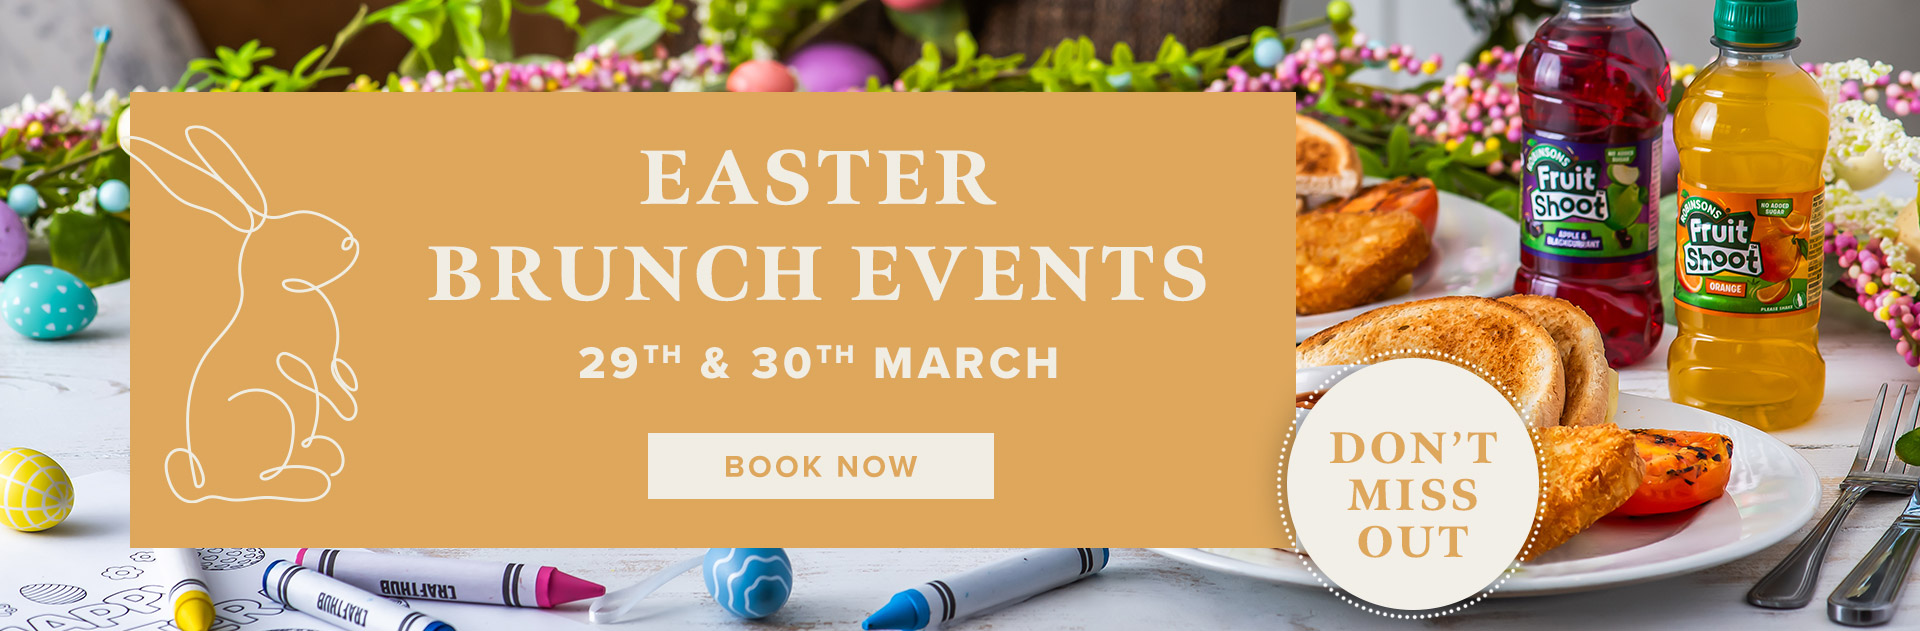 Easter at The Moreton Hall in Bury St Edmunds